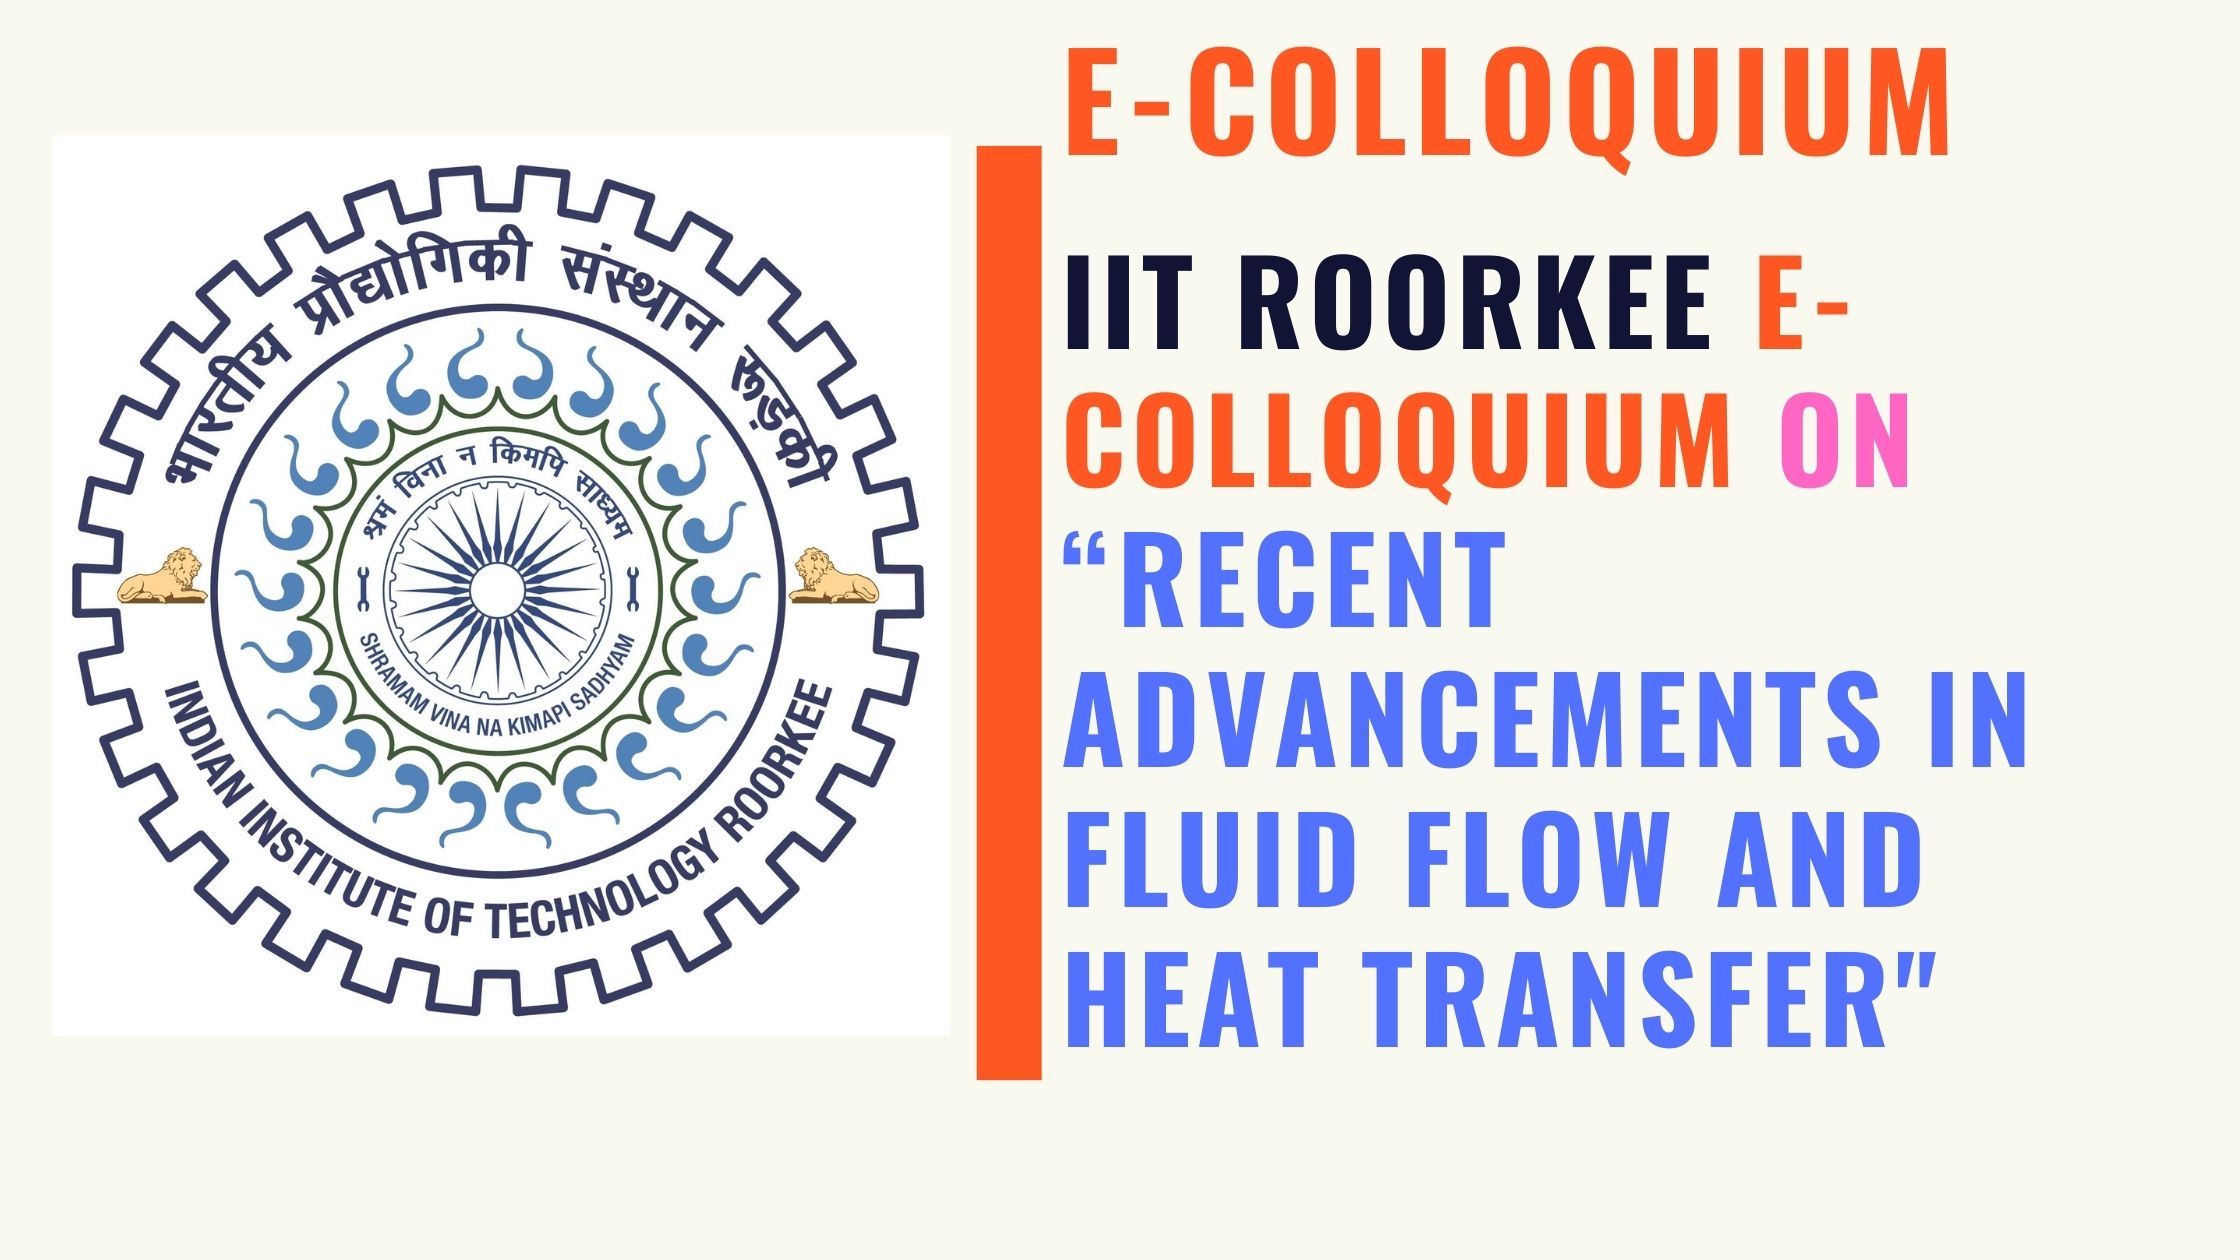 IIT Roorkee e-Colloquium on RECENT ADVANCEMENTS IN FLUID FLOW AND HEAT TRANSFER